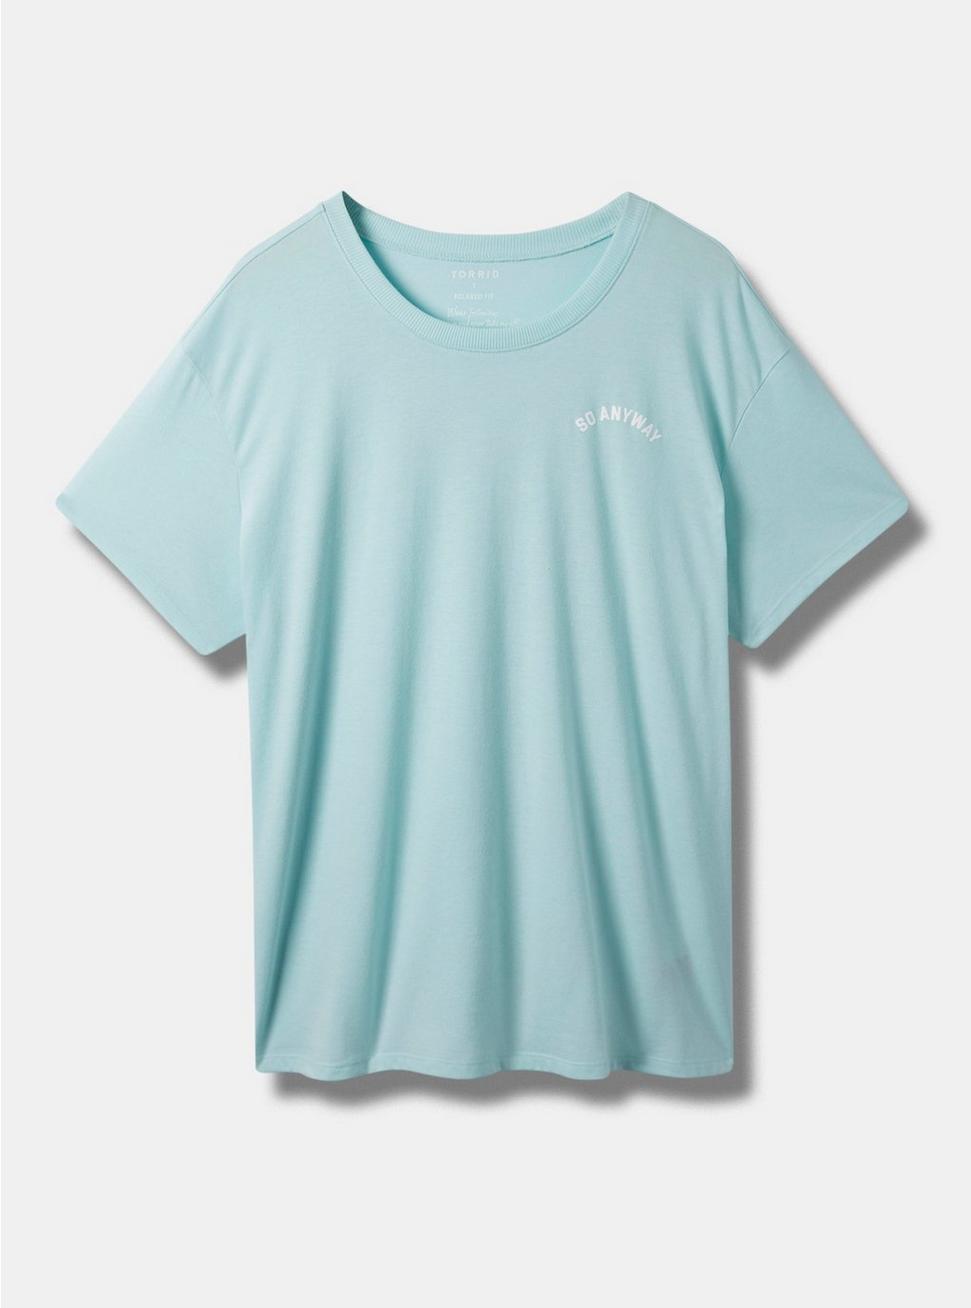 So Anyway Relaxed Fit Signature Jersey Crew Neck Tee, CANAL BLUE, hi-res